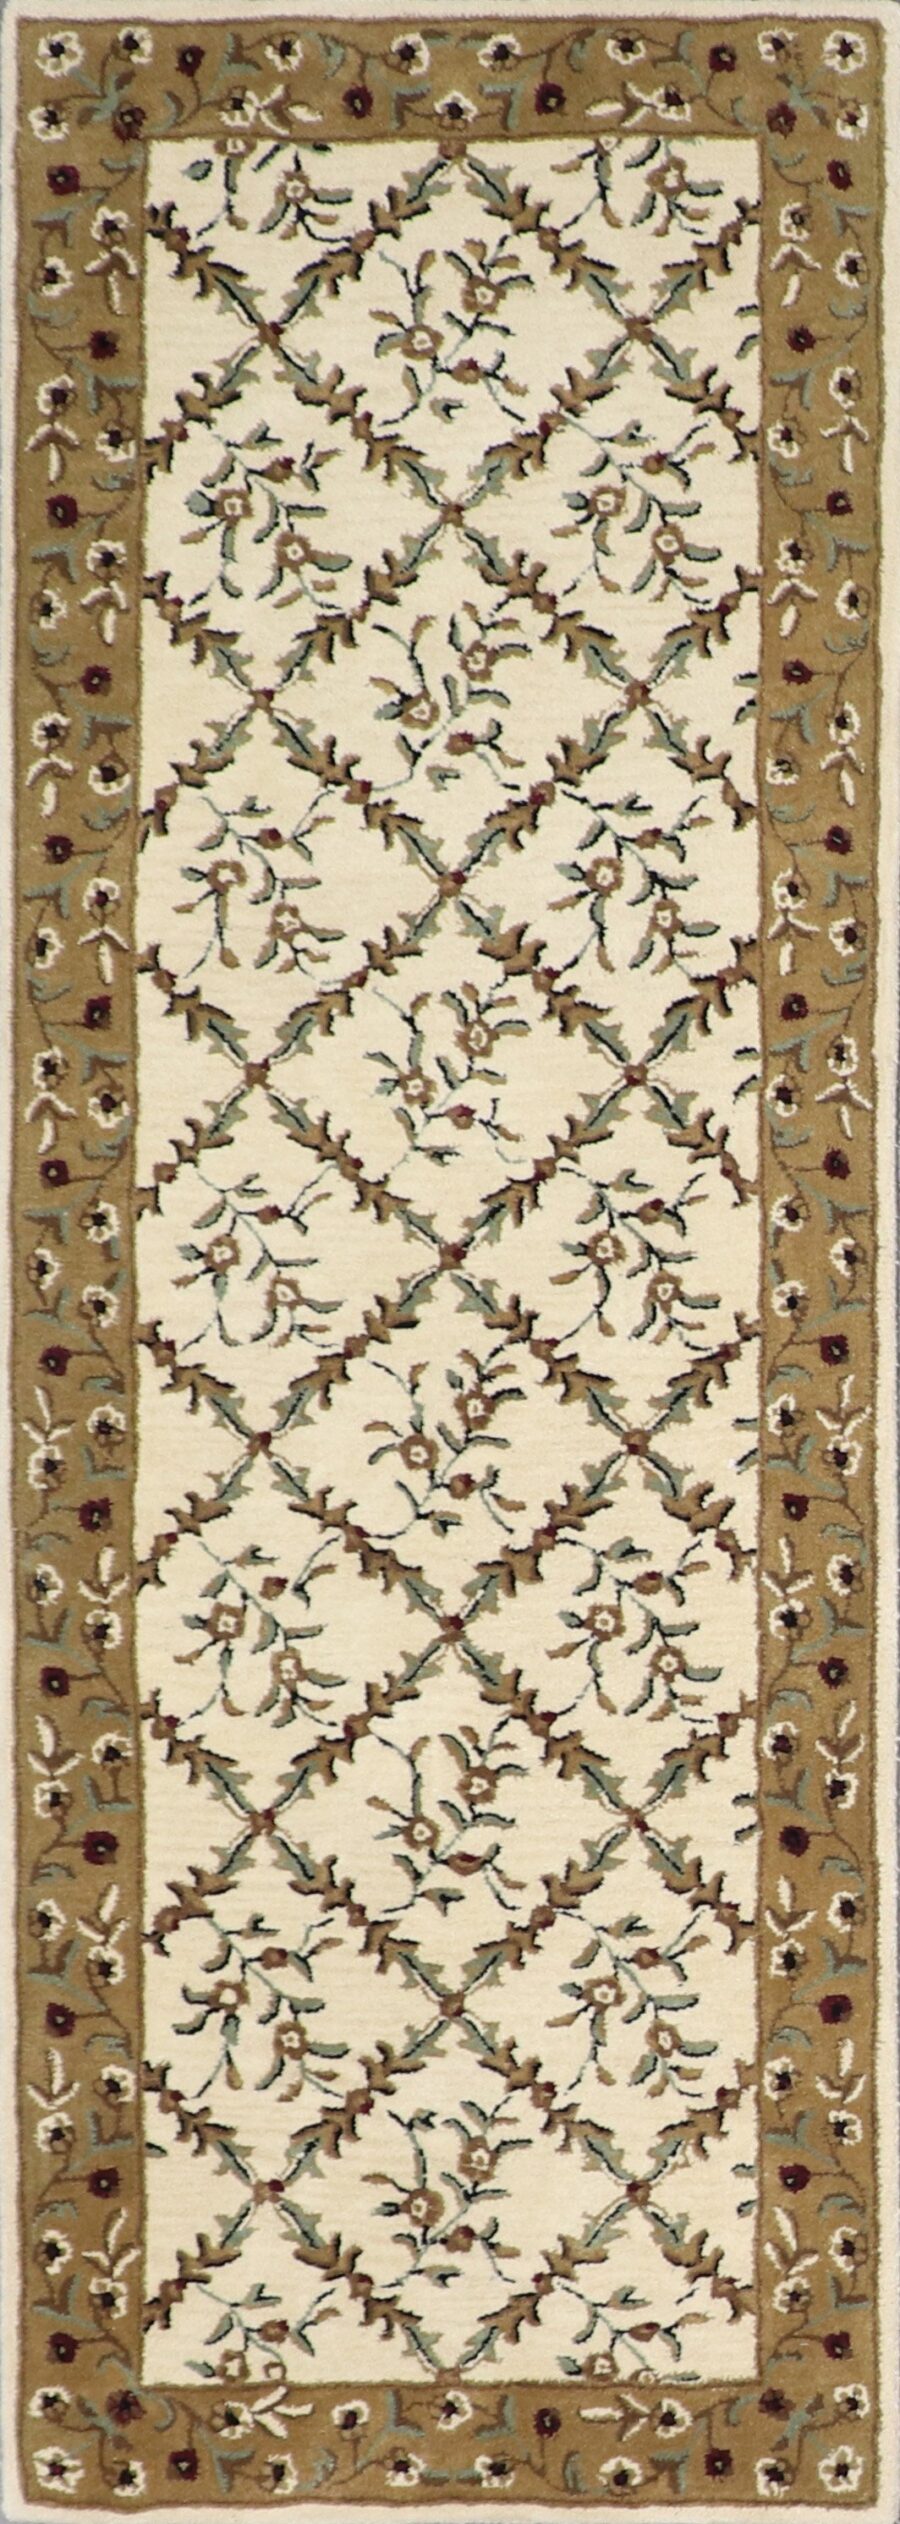 3'x8'4" Decorative Ivory Wool Hand-Tufted Rug - Direct Rug Import | Rugs in Chicago, Indiana,South Bend,Granger